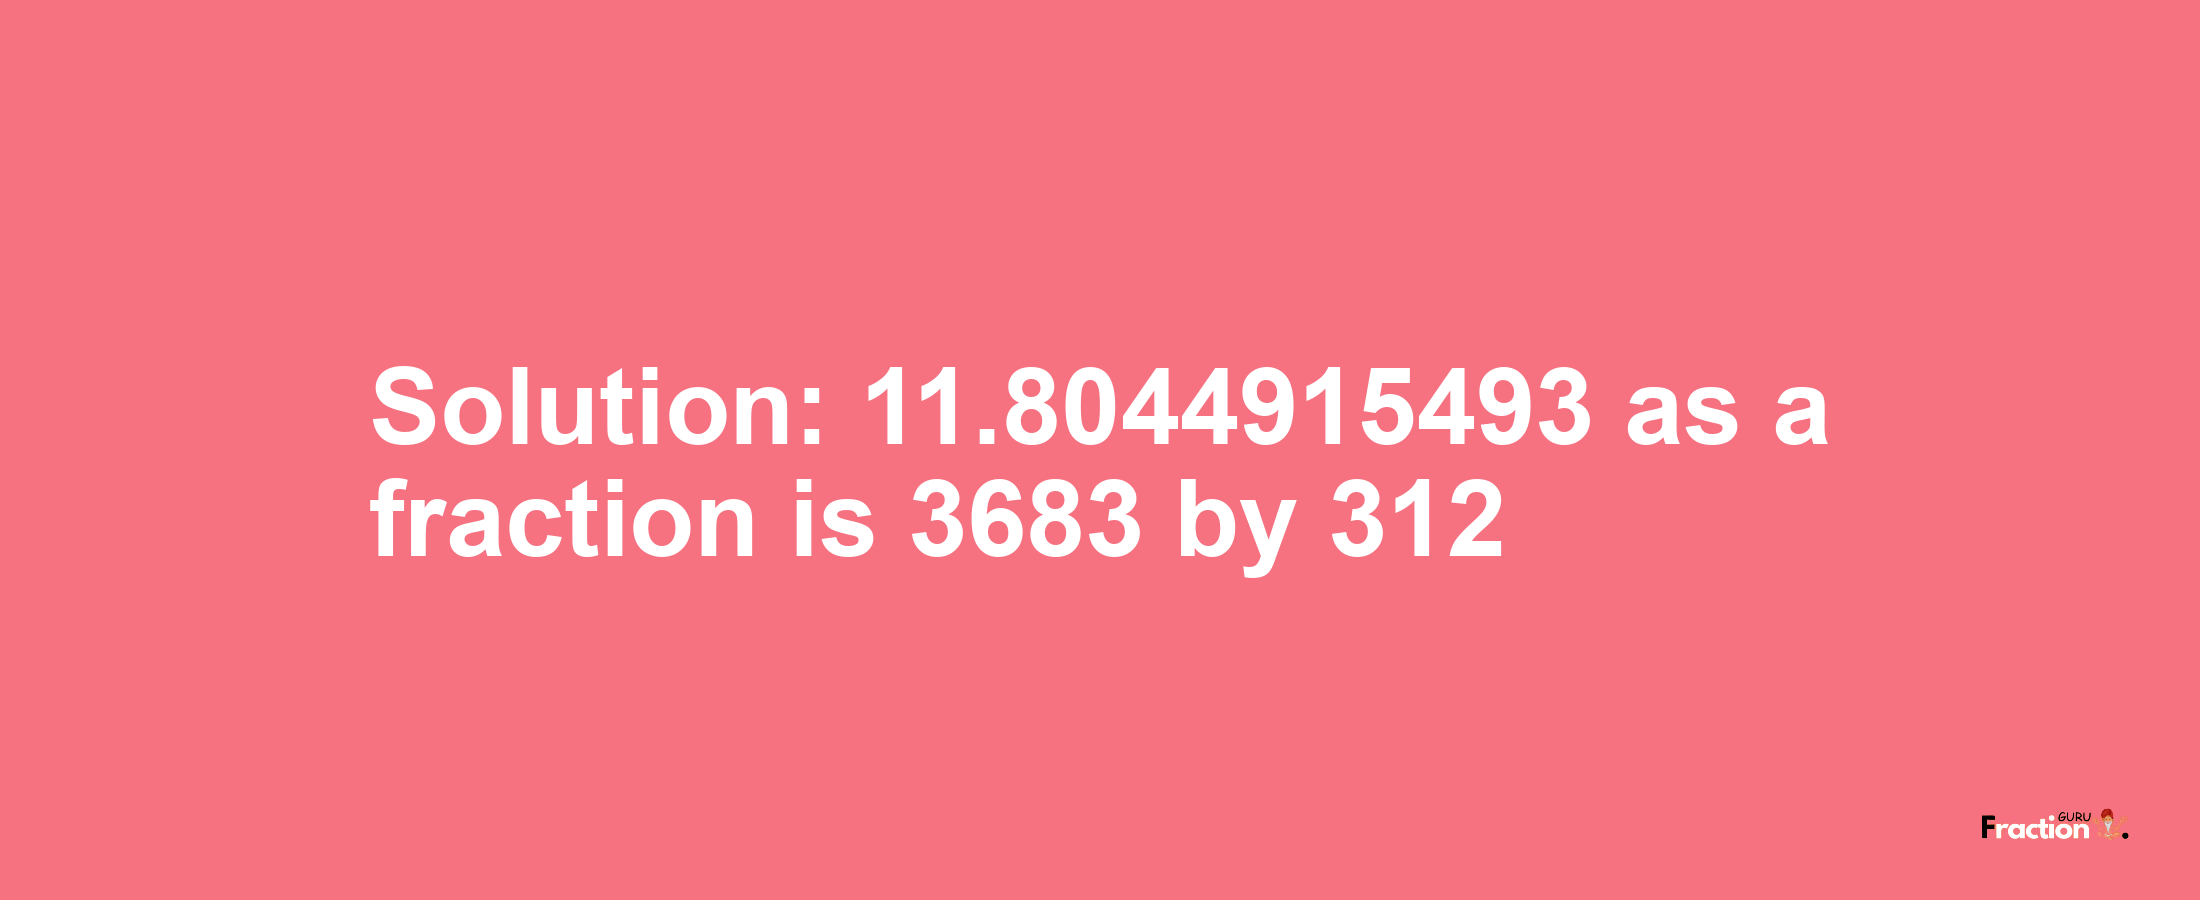 Solution:11.8044915493 as a fraction is 3683/312